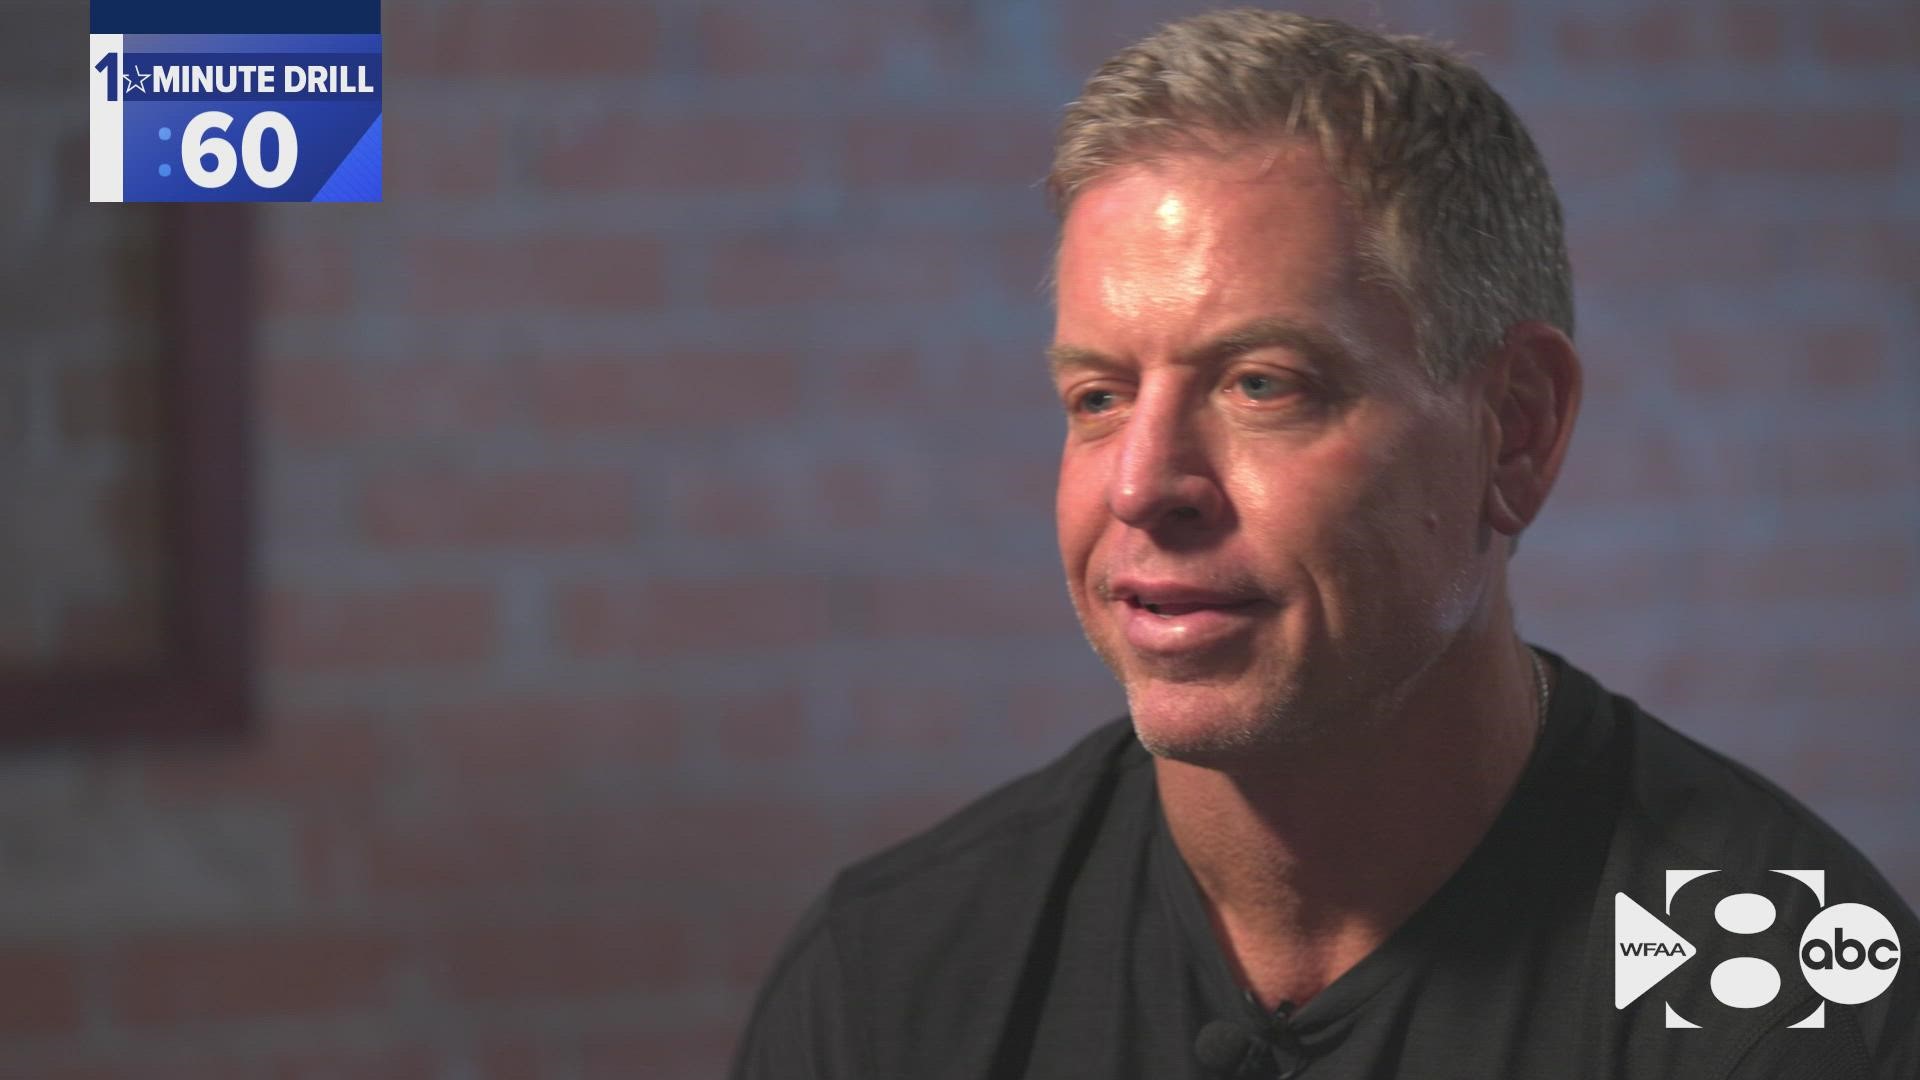 WFAA sports anchor Joe Trahan sat down with Troy Aikman for a rapid-fire speed round ahead of the Cowboys' Monday Night Football game.